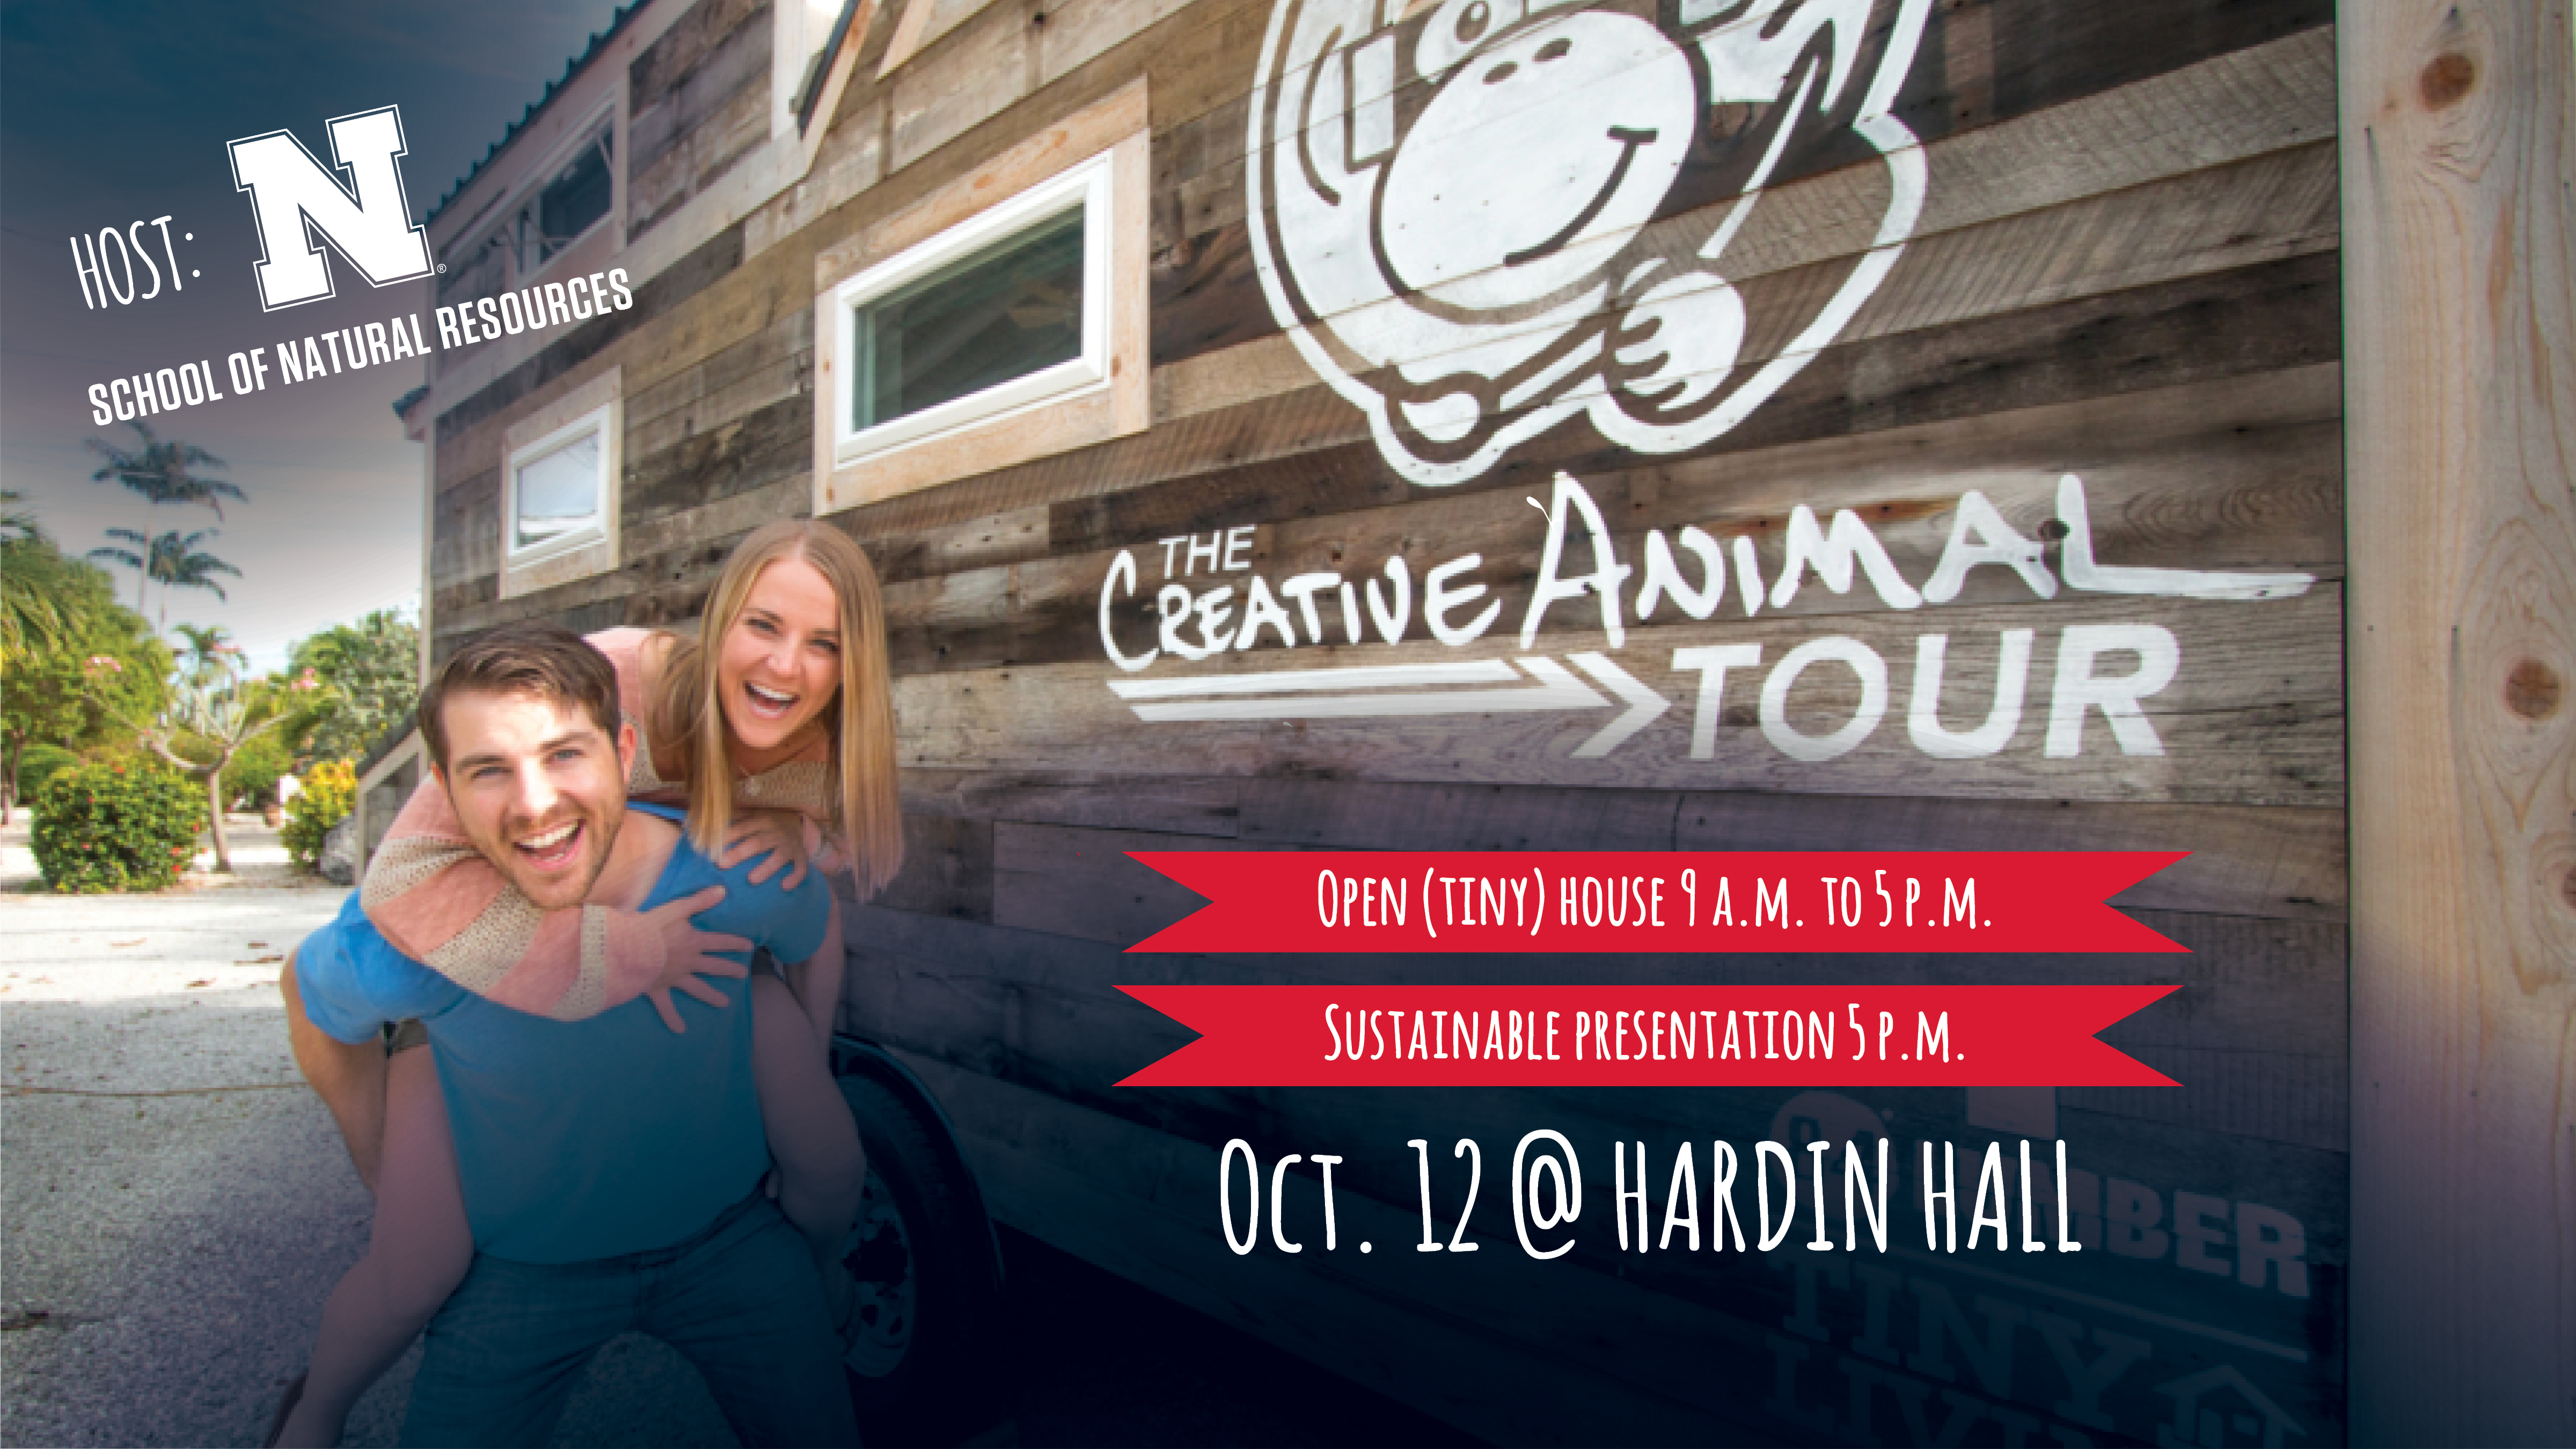 The Creative Animal Tour is coming to SNR on Oct. 12. | Courtesy image